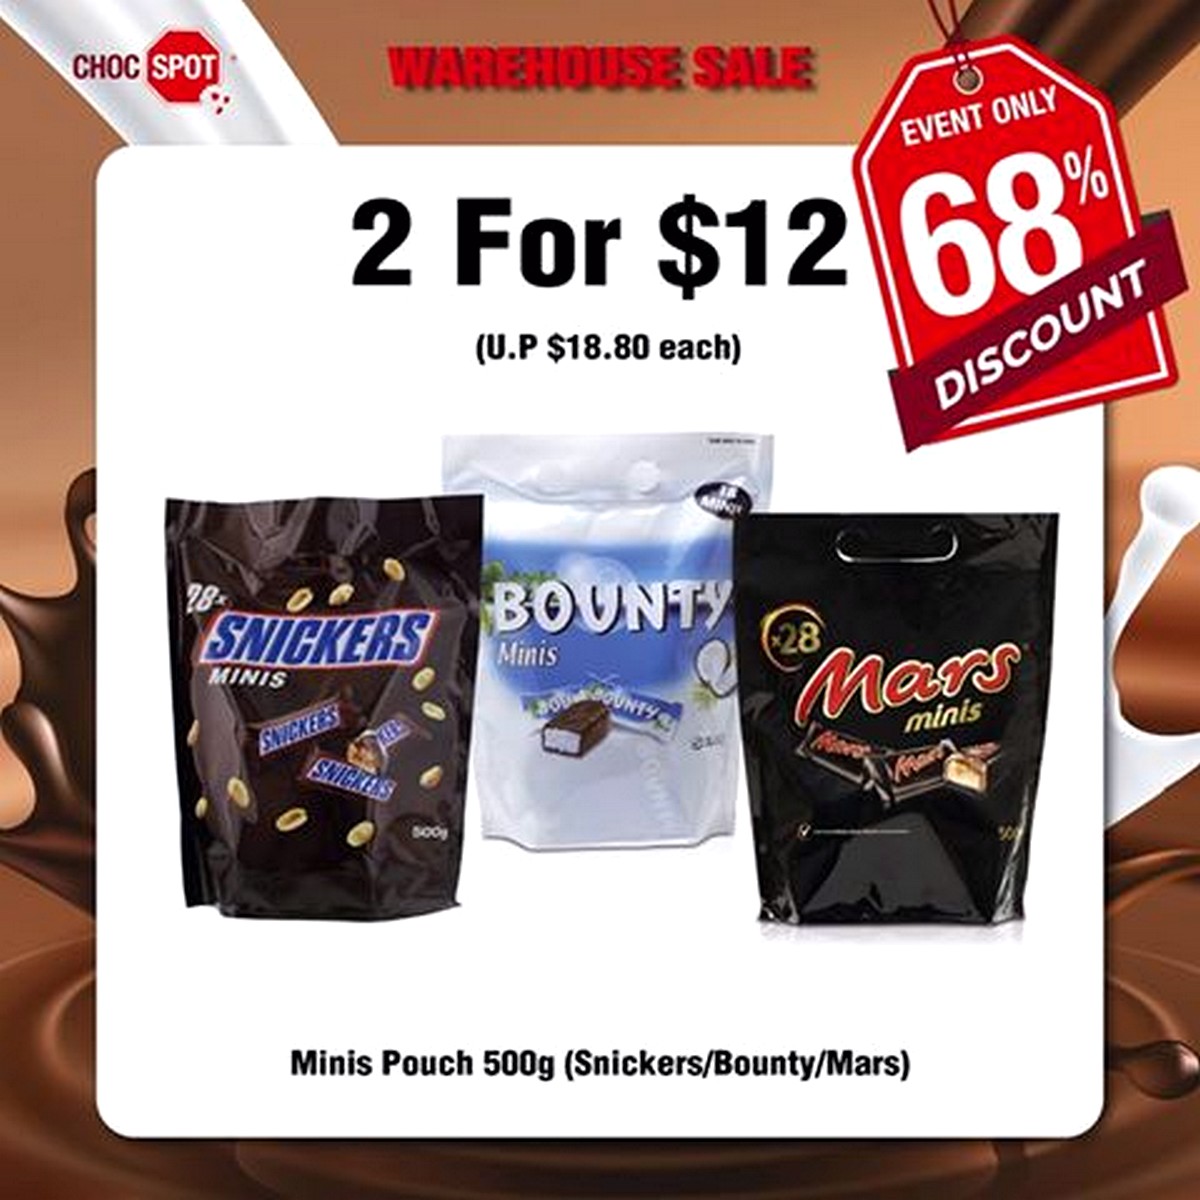 Choc-Spot-Warehouse-Sale-Highlights-011 24 Jul-2 Aug 2020: Choc Spot Warehouse Sale! Up to 80% off Chocolates, Sweets, Chips, Biscuits!